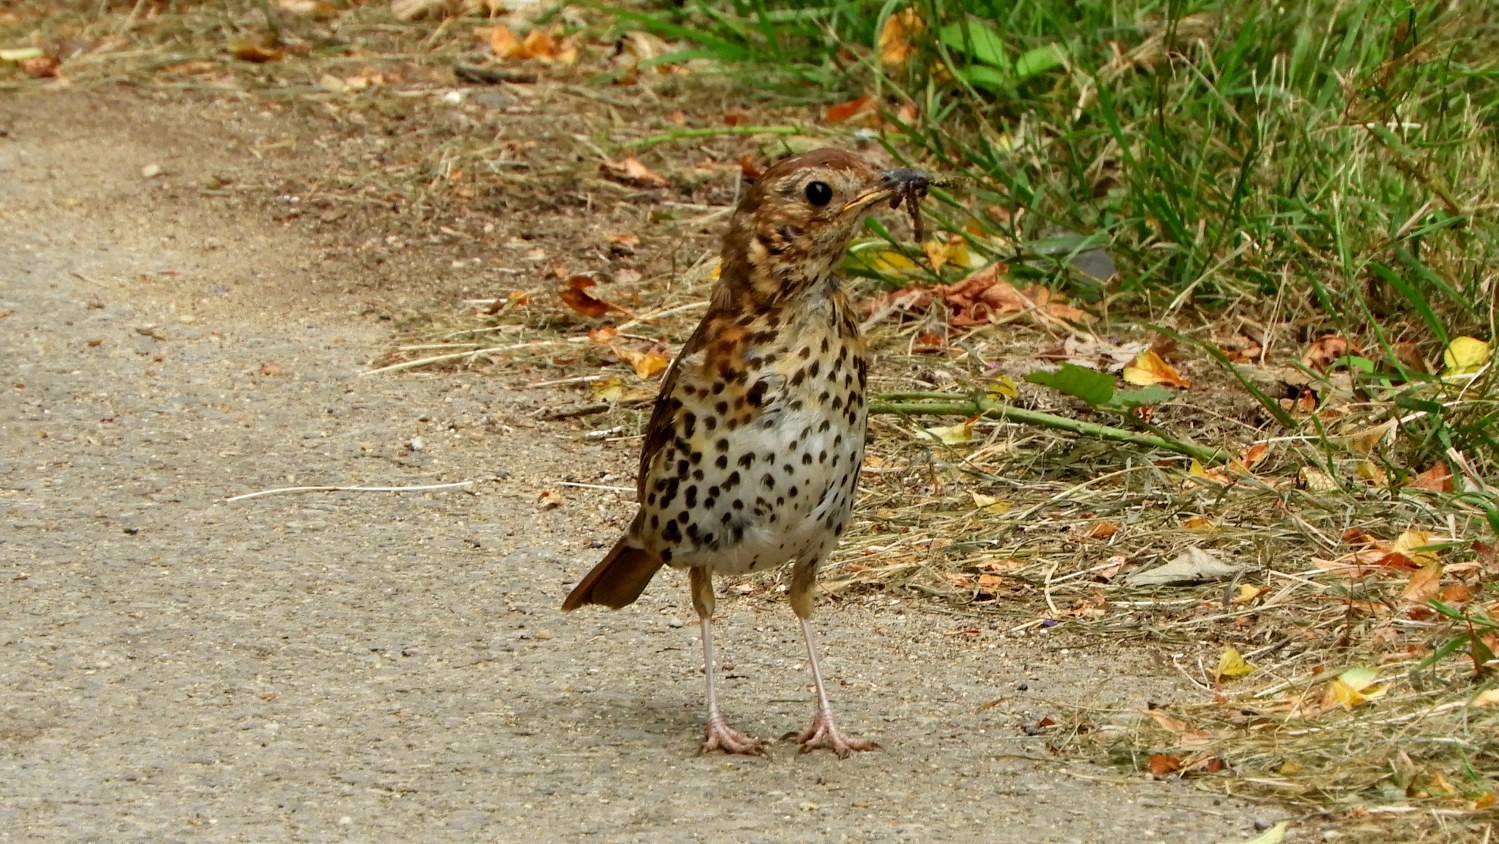 The Thrush with its supper